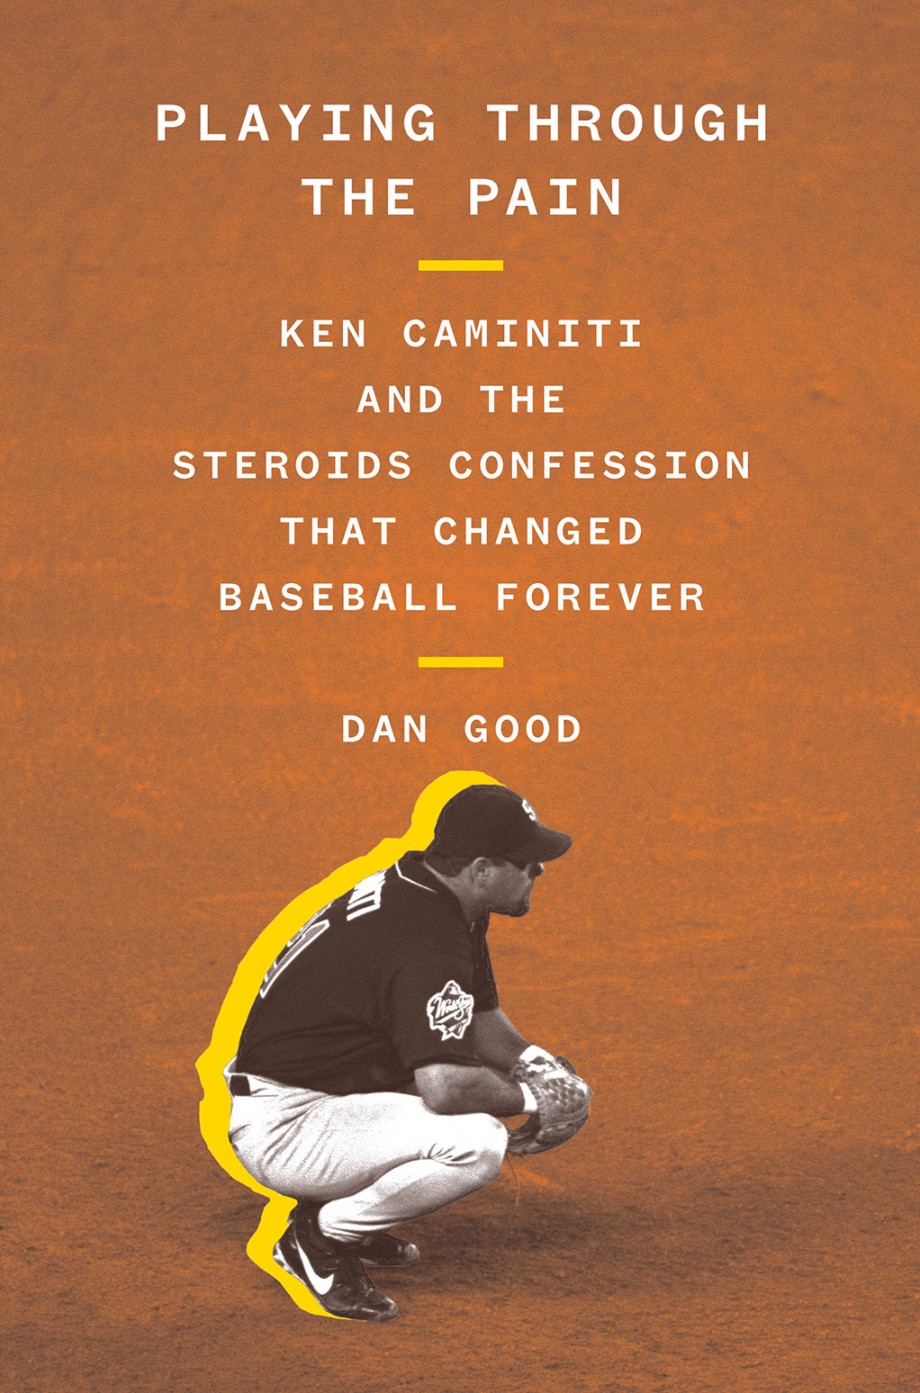 Playing Through the Pain Ken Caminiti and the Steroids Confession That Changed Baseball Forever